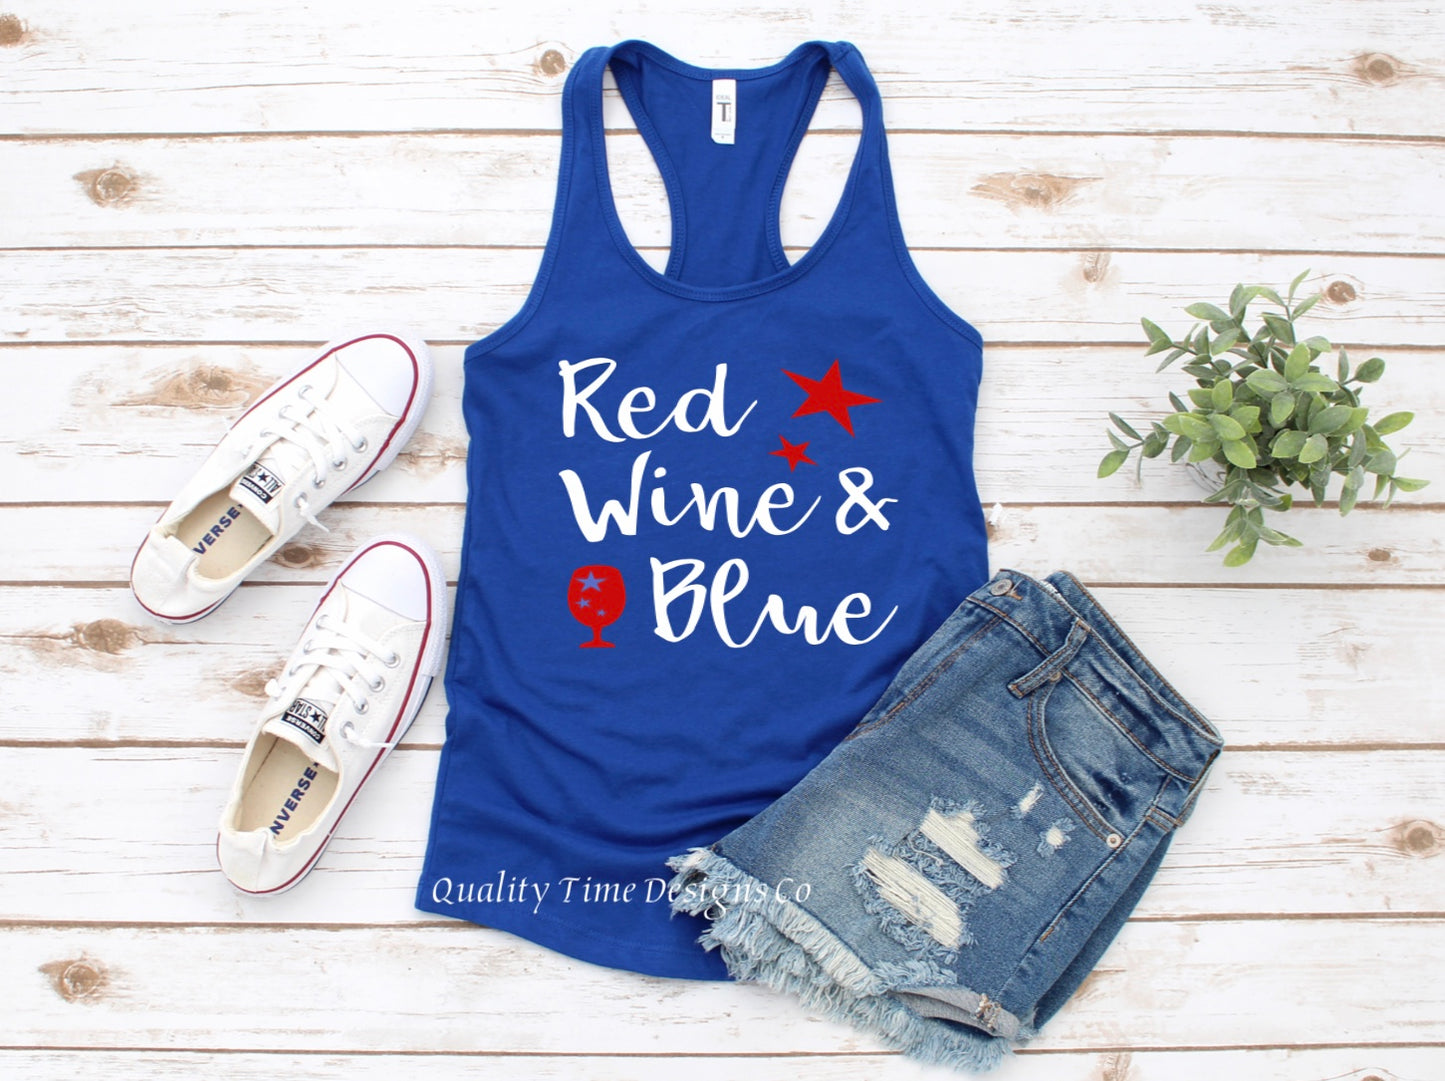 Red Wine and Blue racerback tank top